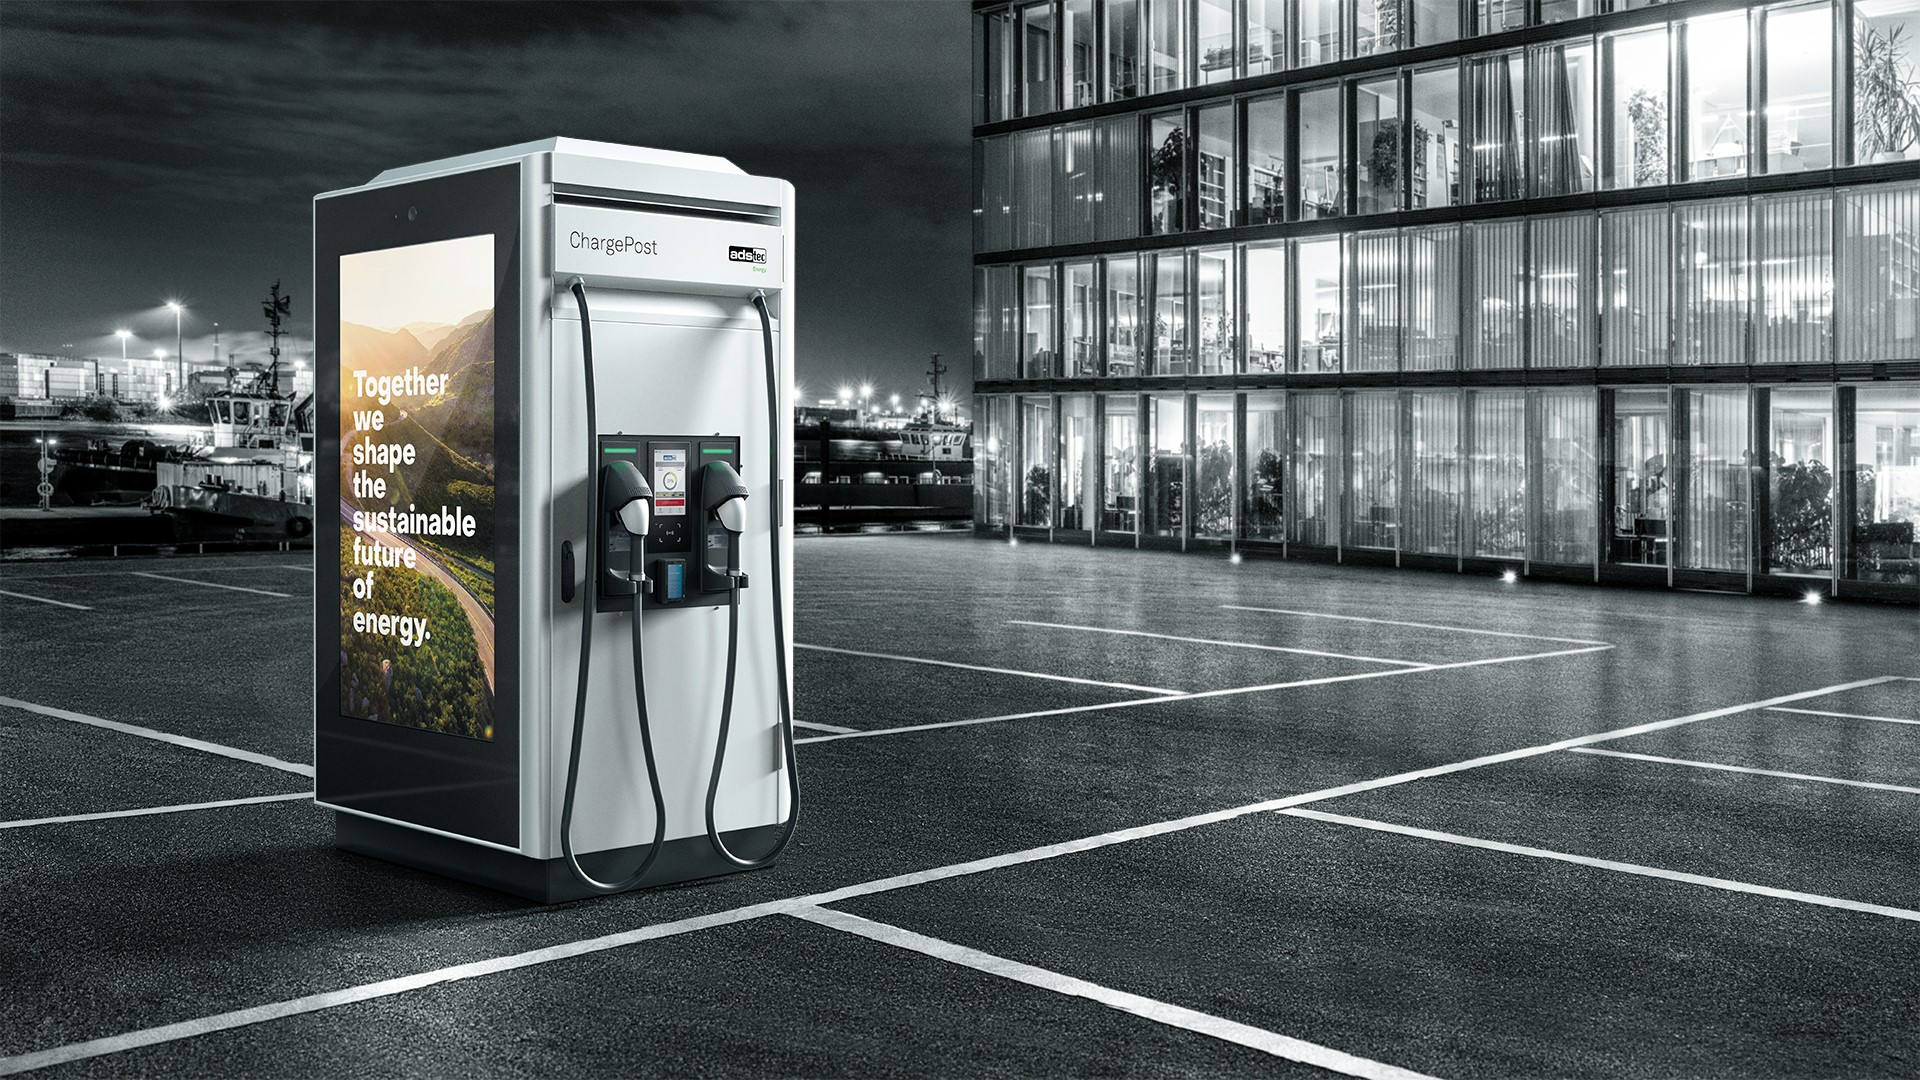 Powering Ahead: The Wonders of Charge Point Technology